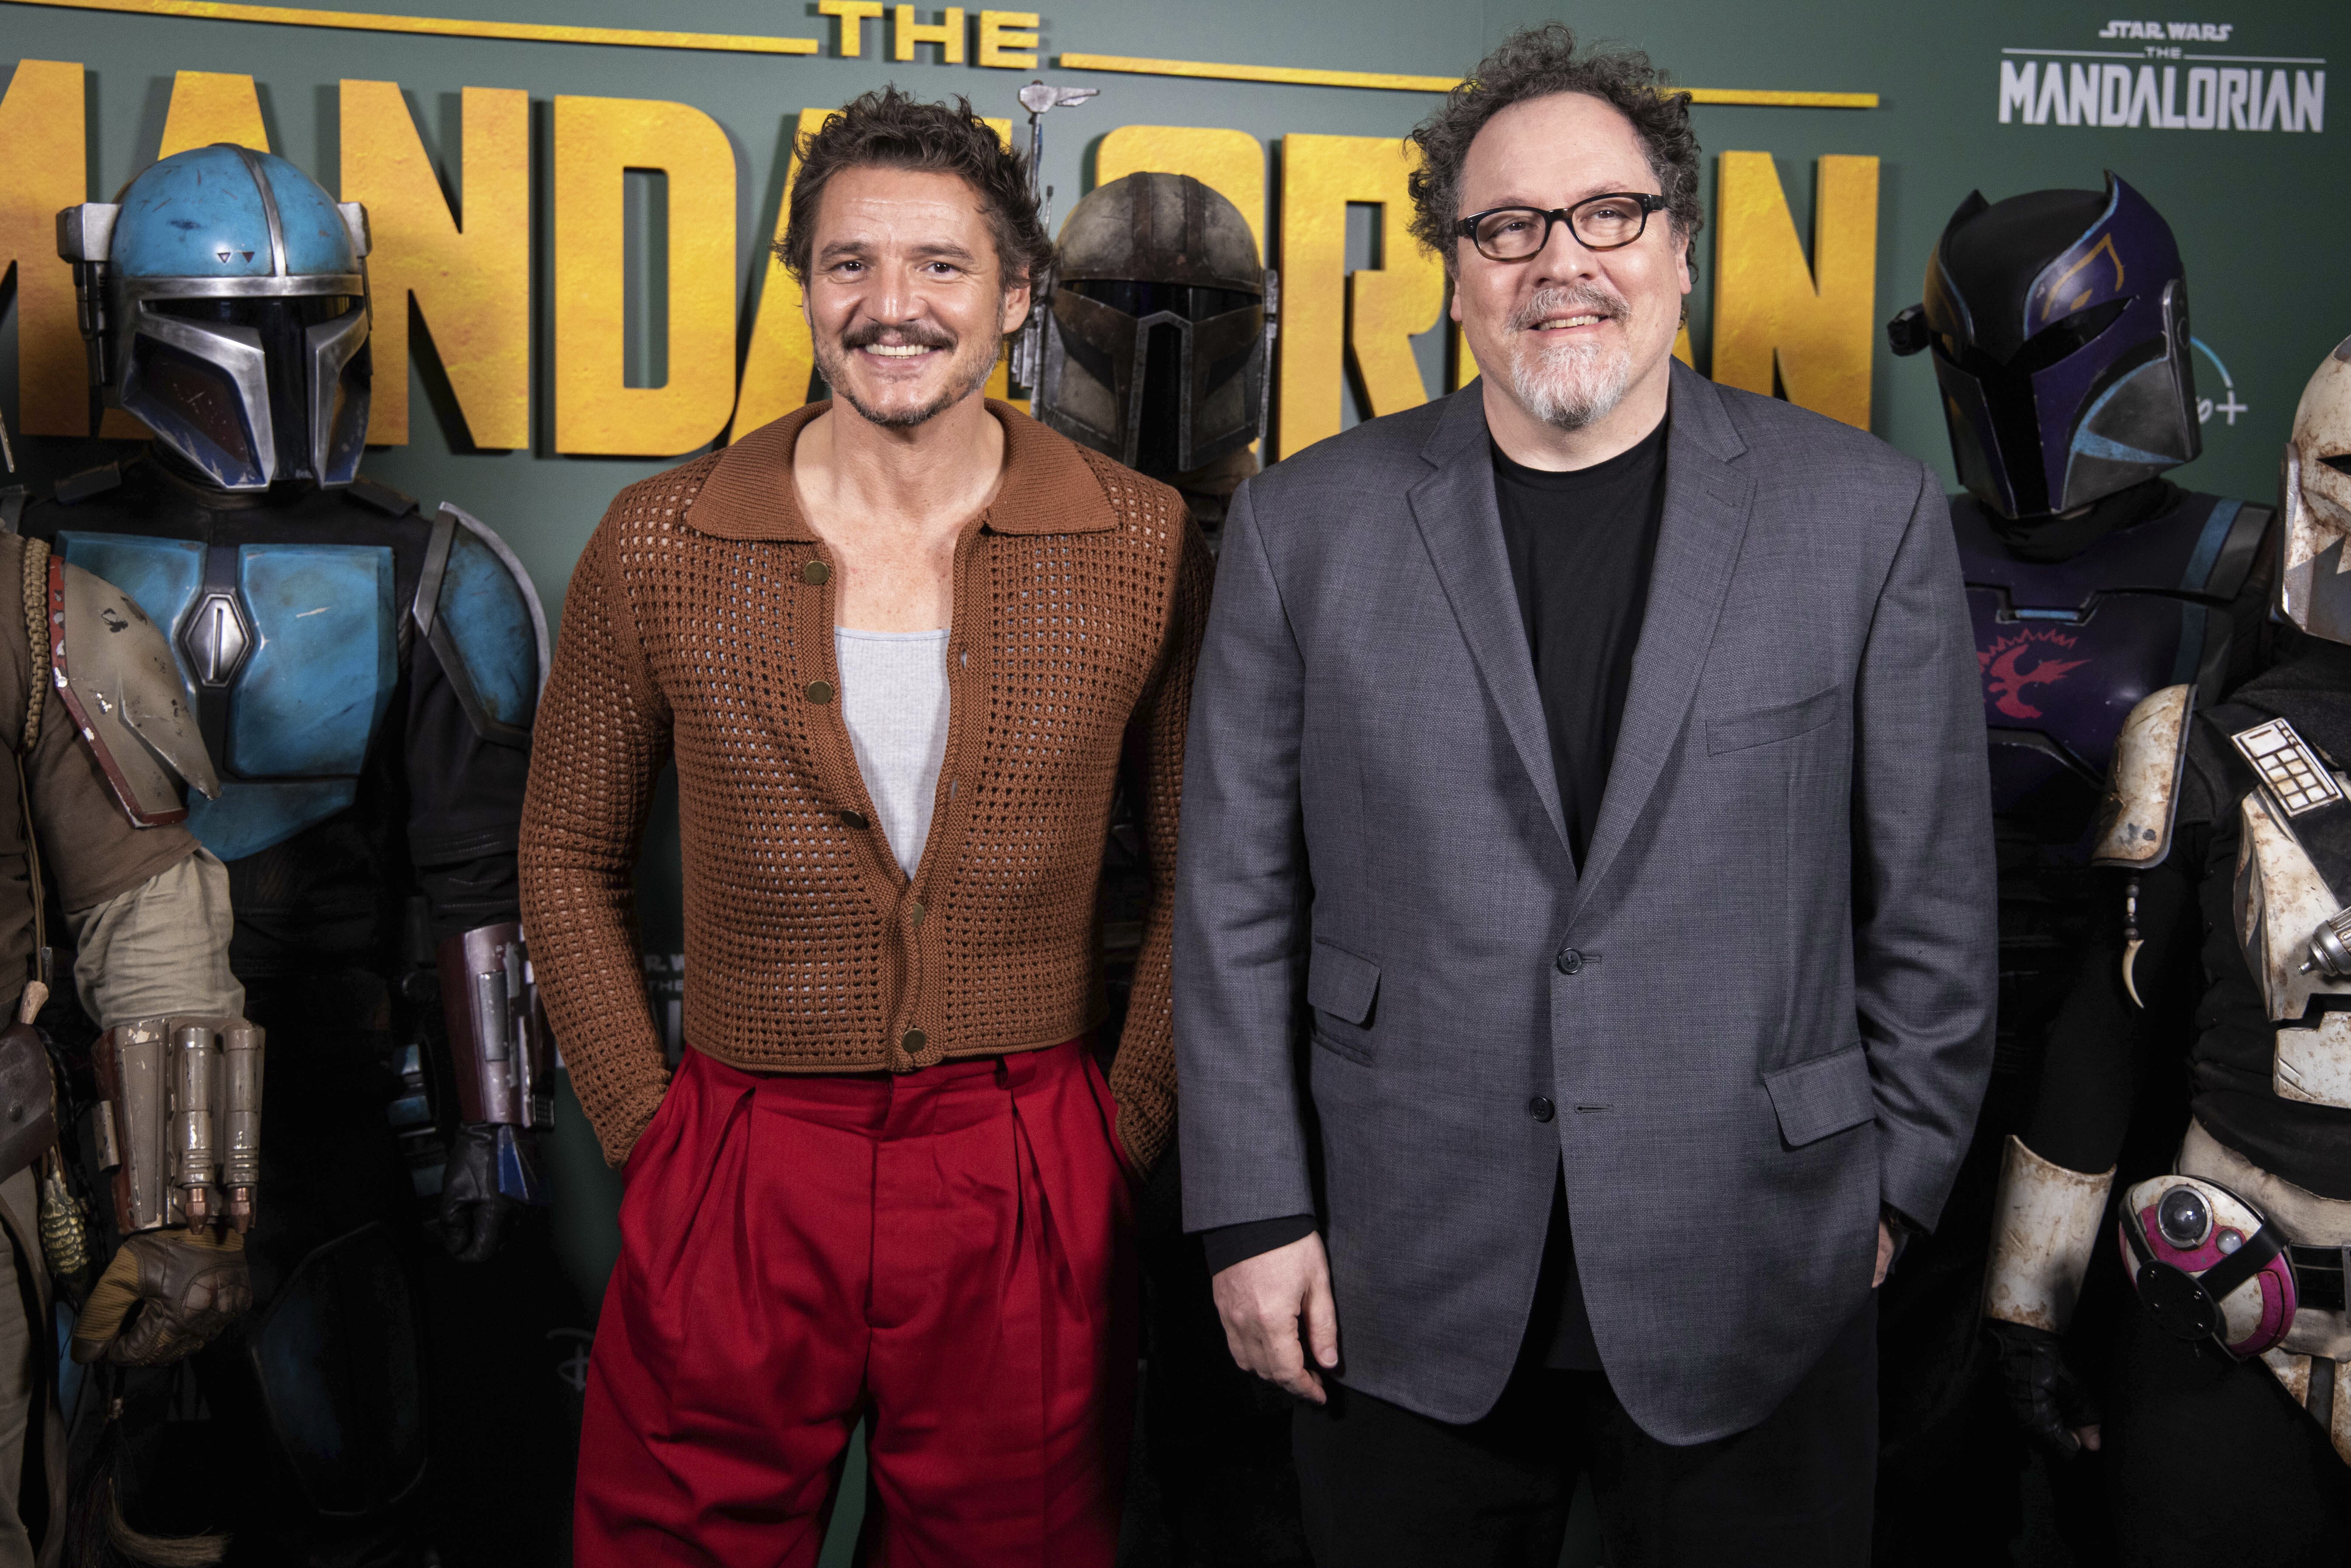 Pedro Pascal, left, and Jon Favreau pose for photographers during a photo call to promote the TV series 'The Mandalorian' in London, Wednesday, Feb. 22, 2023. (Photo by Vianney Le Caer/Invision/AP)